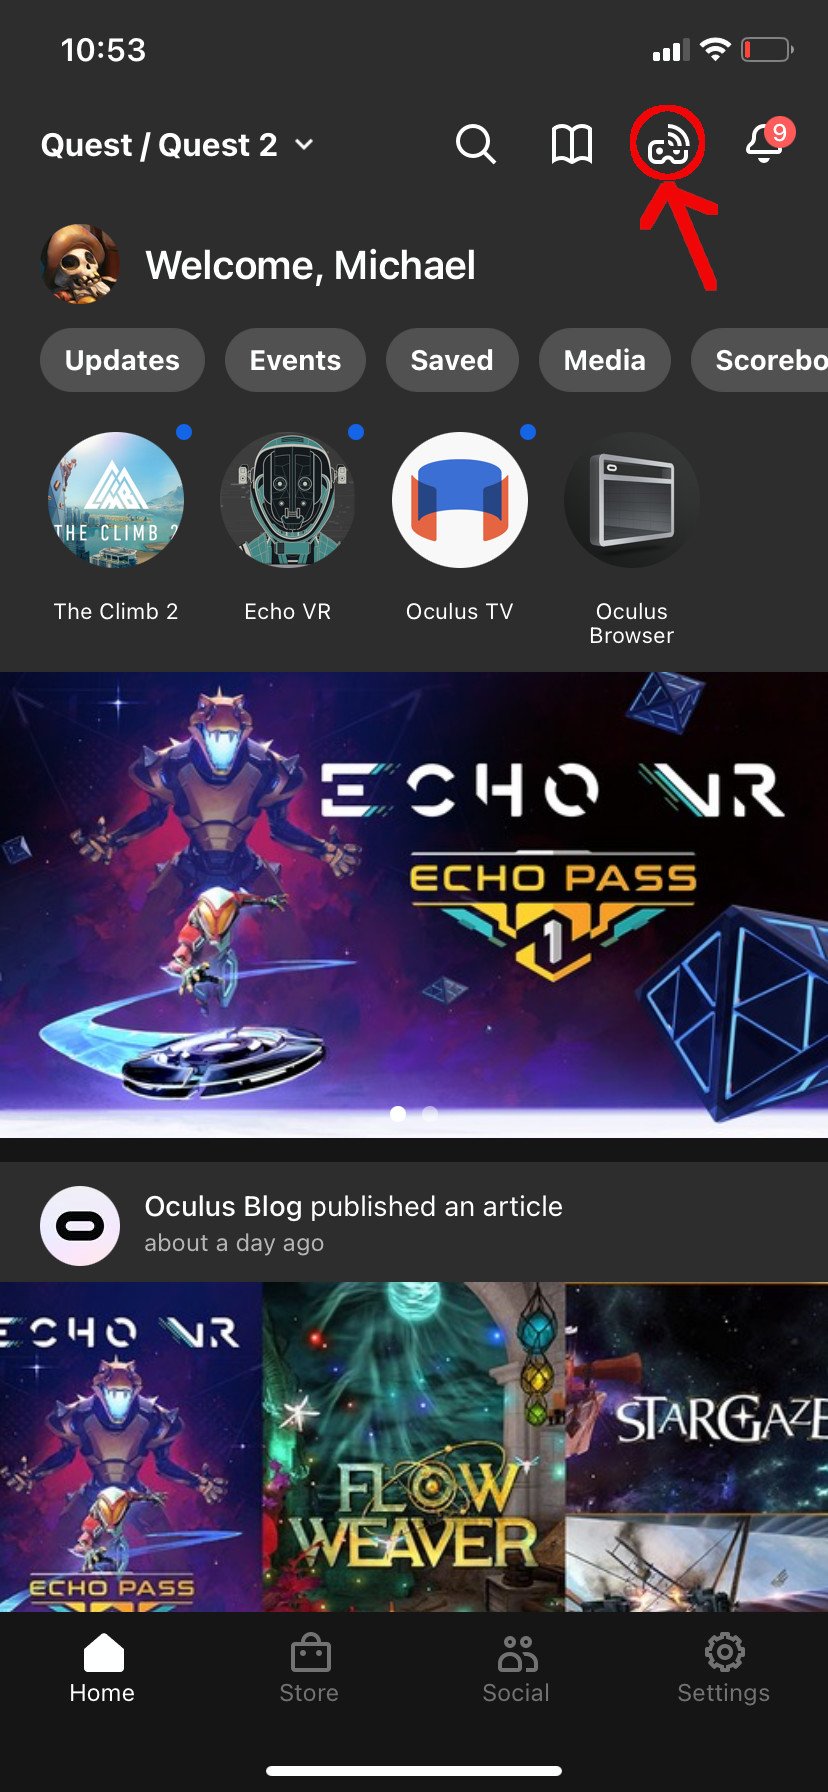 Oculus app home screen, with arrow pointed to Cast button